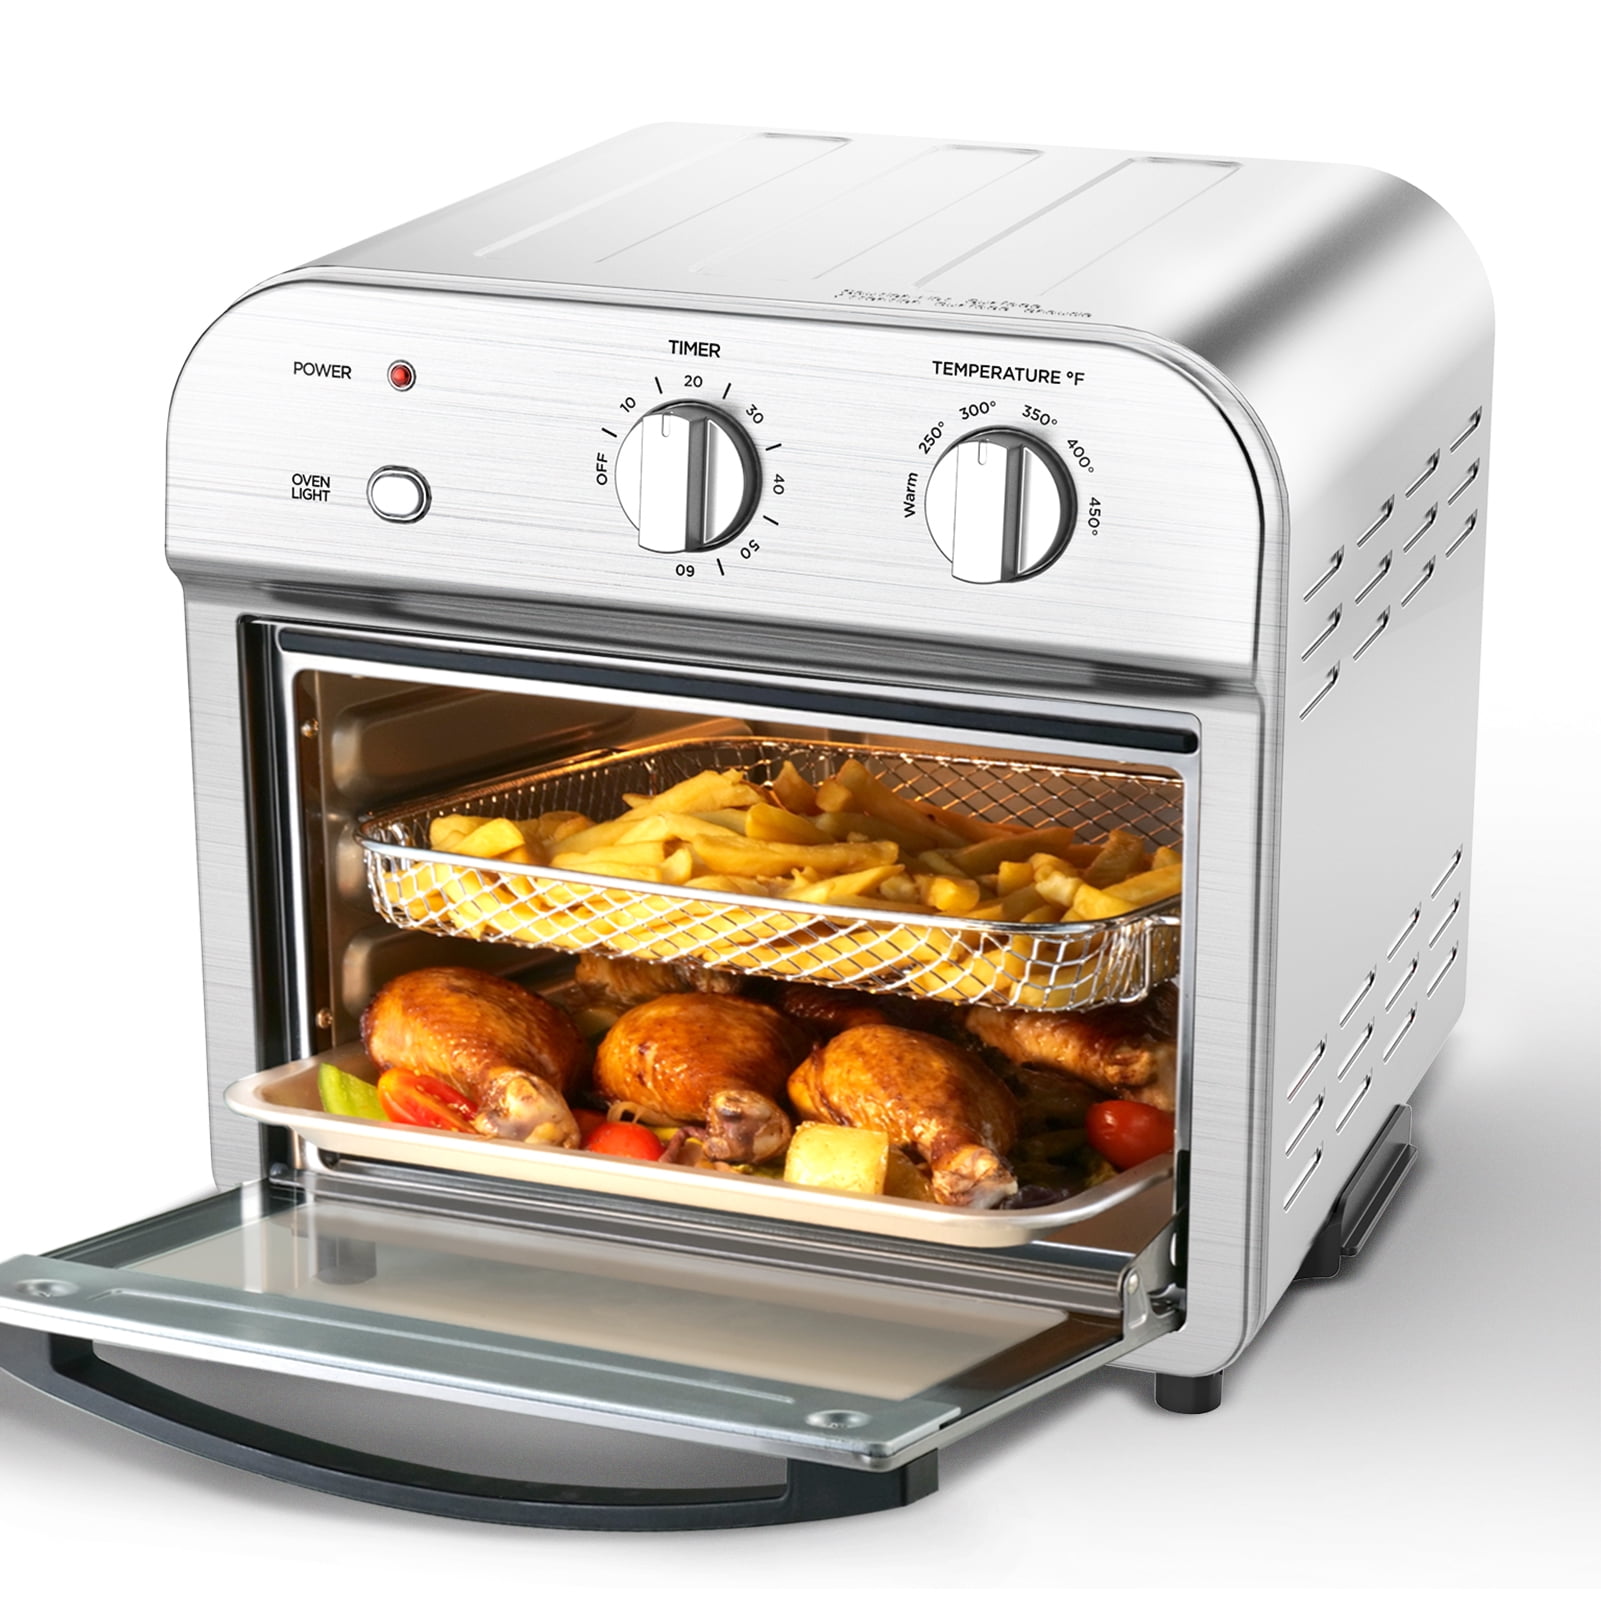  Geek Chef Air Fryer Toaster Oven Combo,16QT Convection